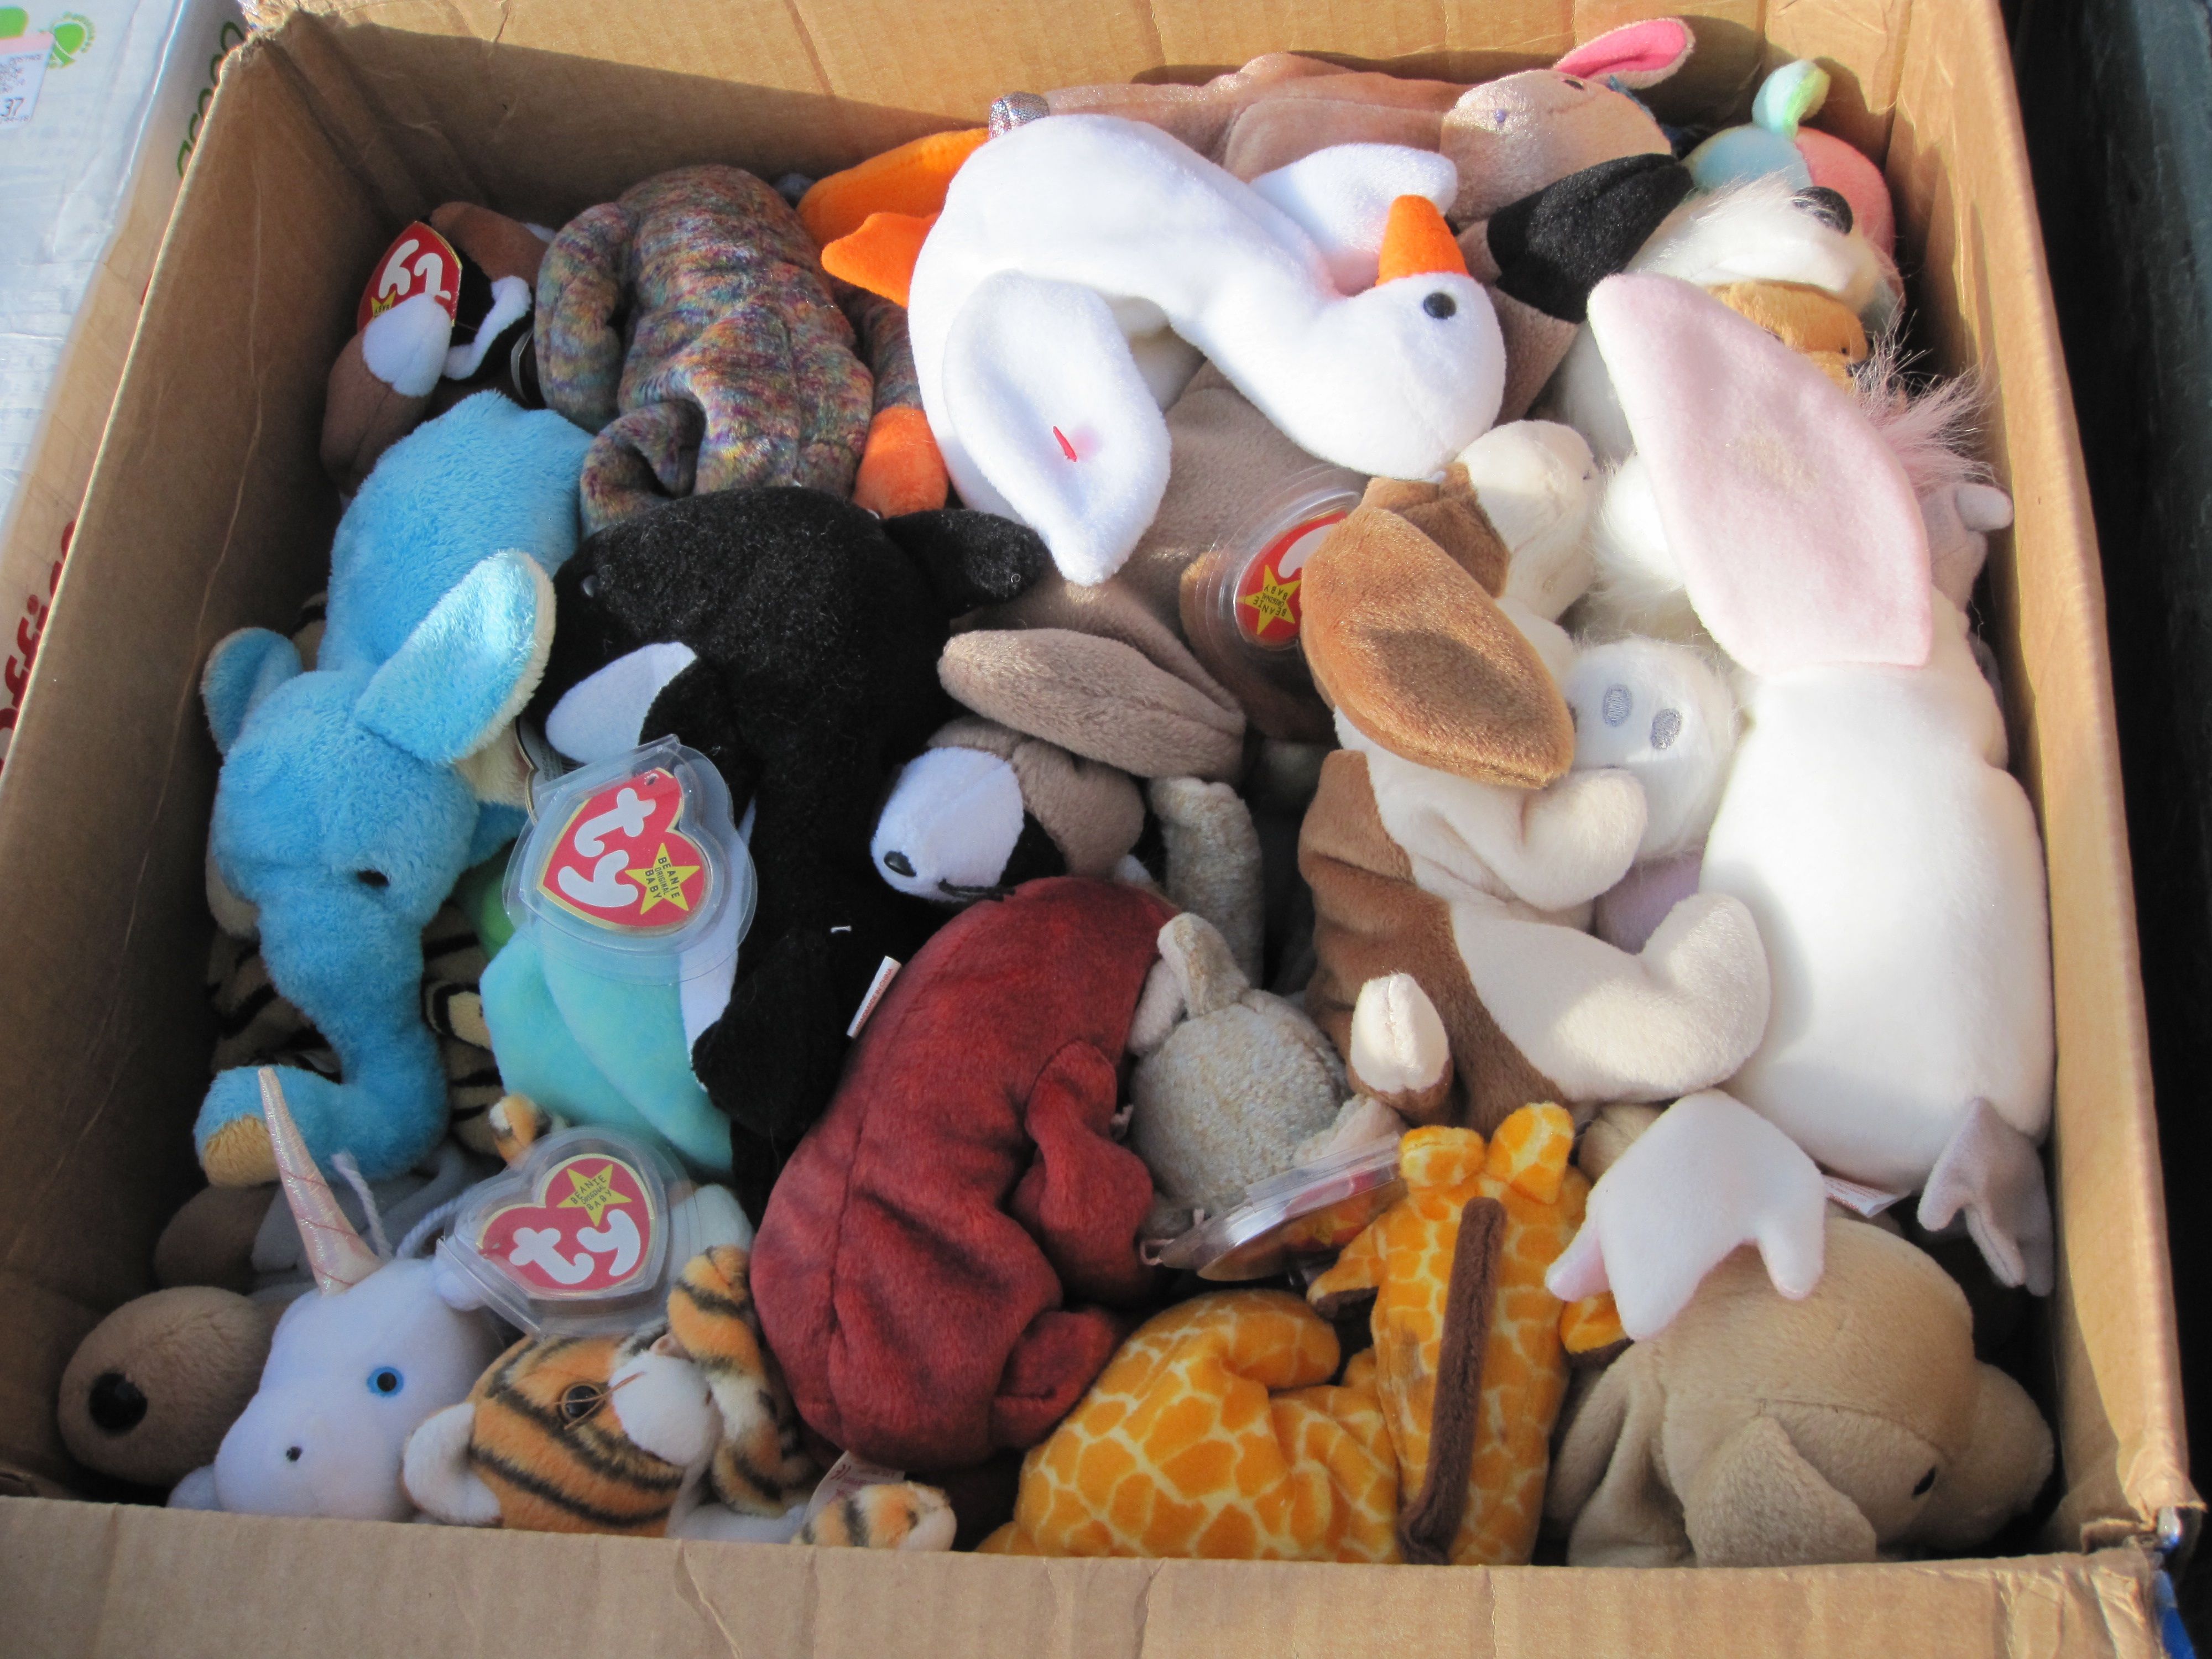 7 Times The Beanie Baby Craze Went Way Further Than Any Of Us Realized